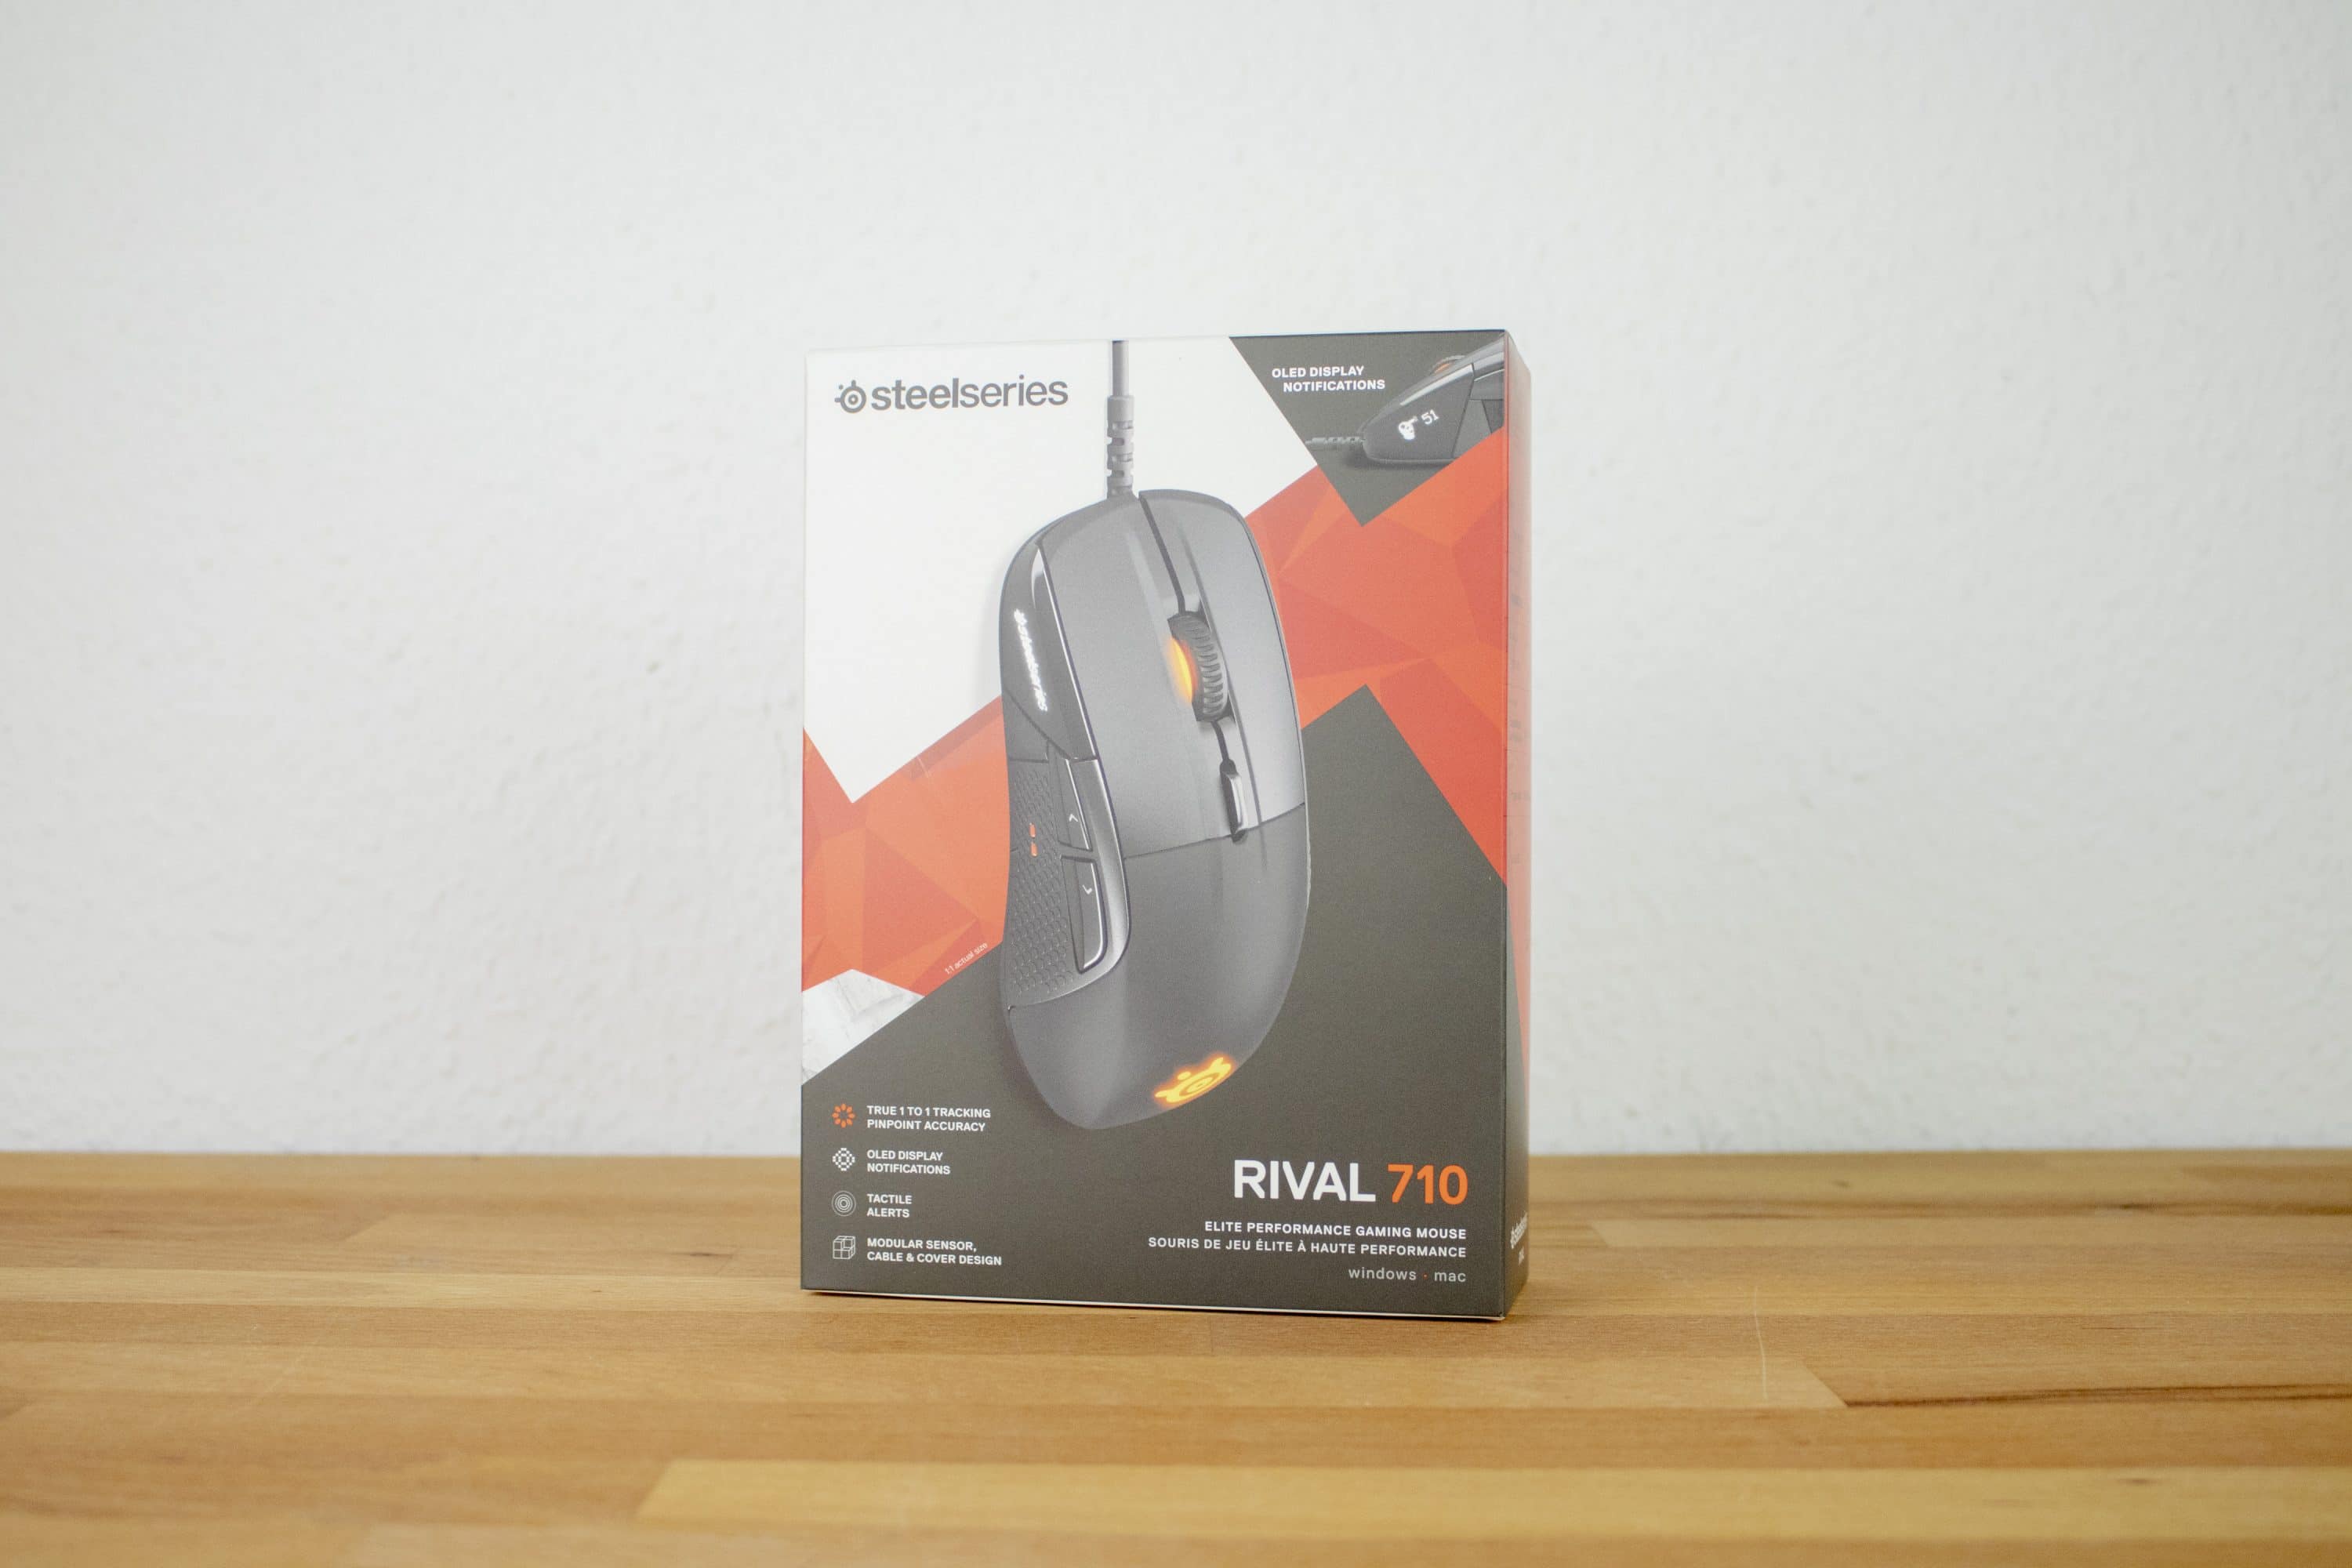 Steelseries Rival 710 Review - This Is What a Feature-Rich Gaming